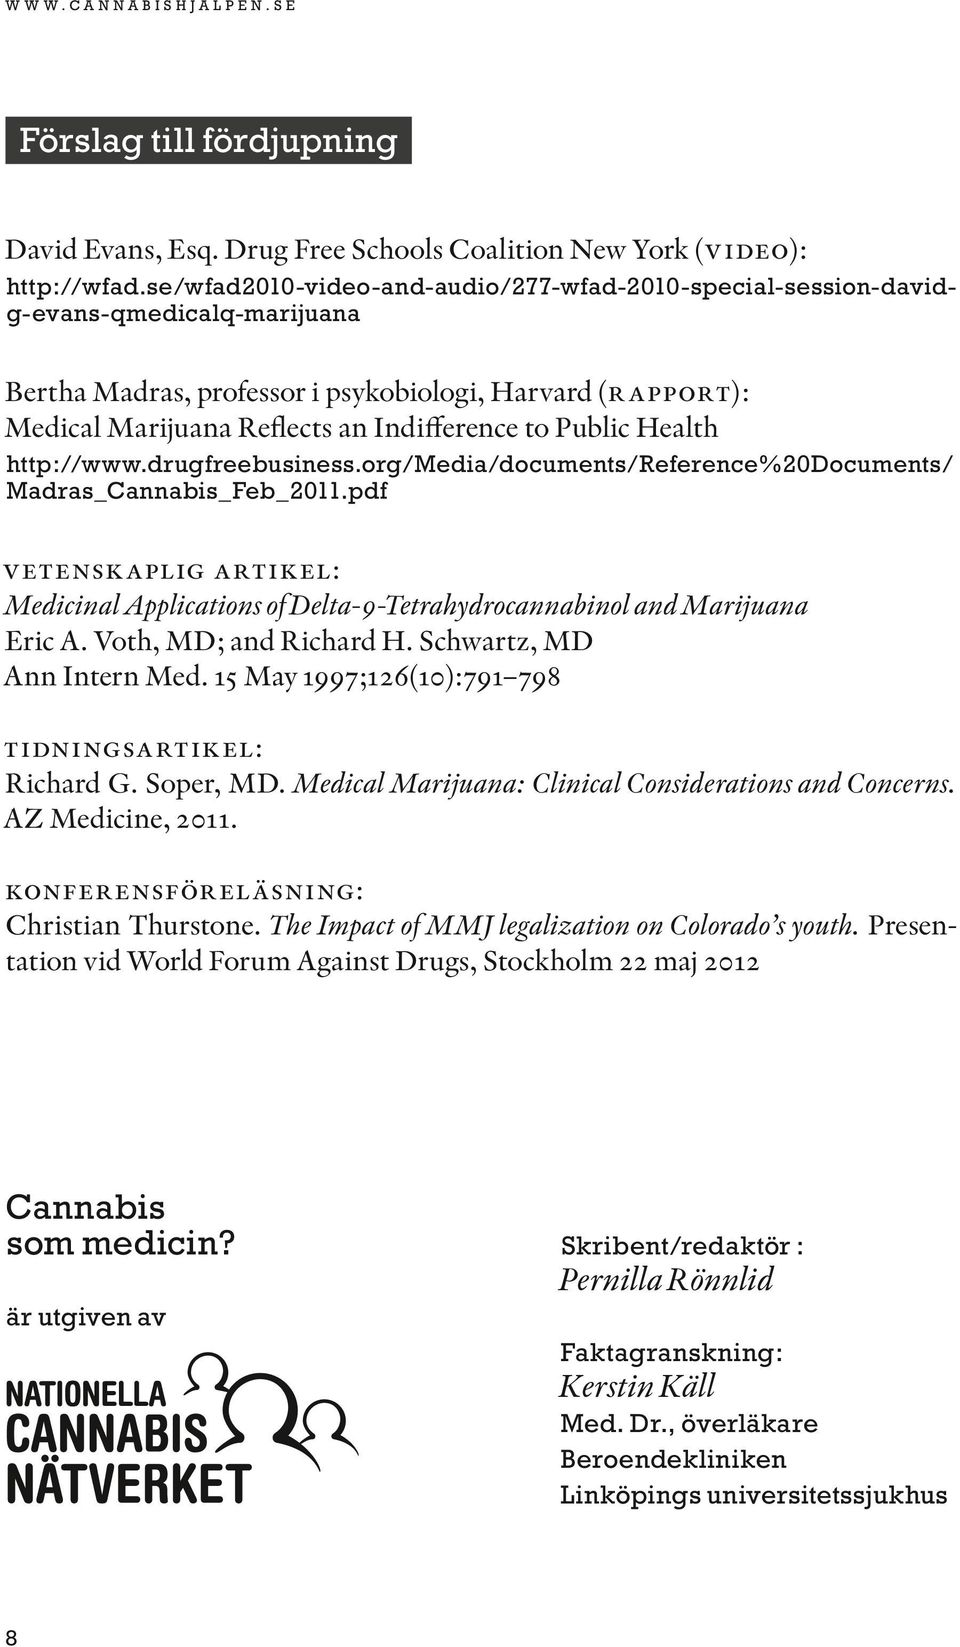 Public Health http://www.drugfreebusiness.org/media/documents/reference%20documents/ Madras_Cannabis_Feb_2011.